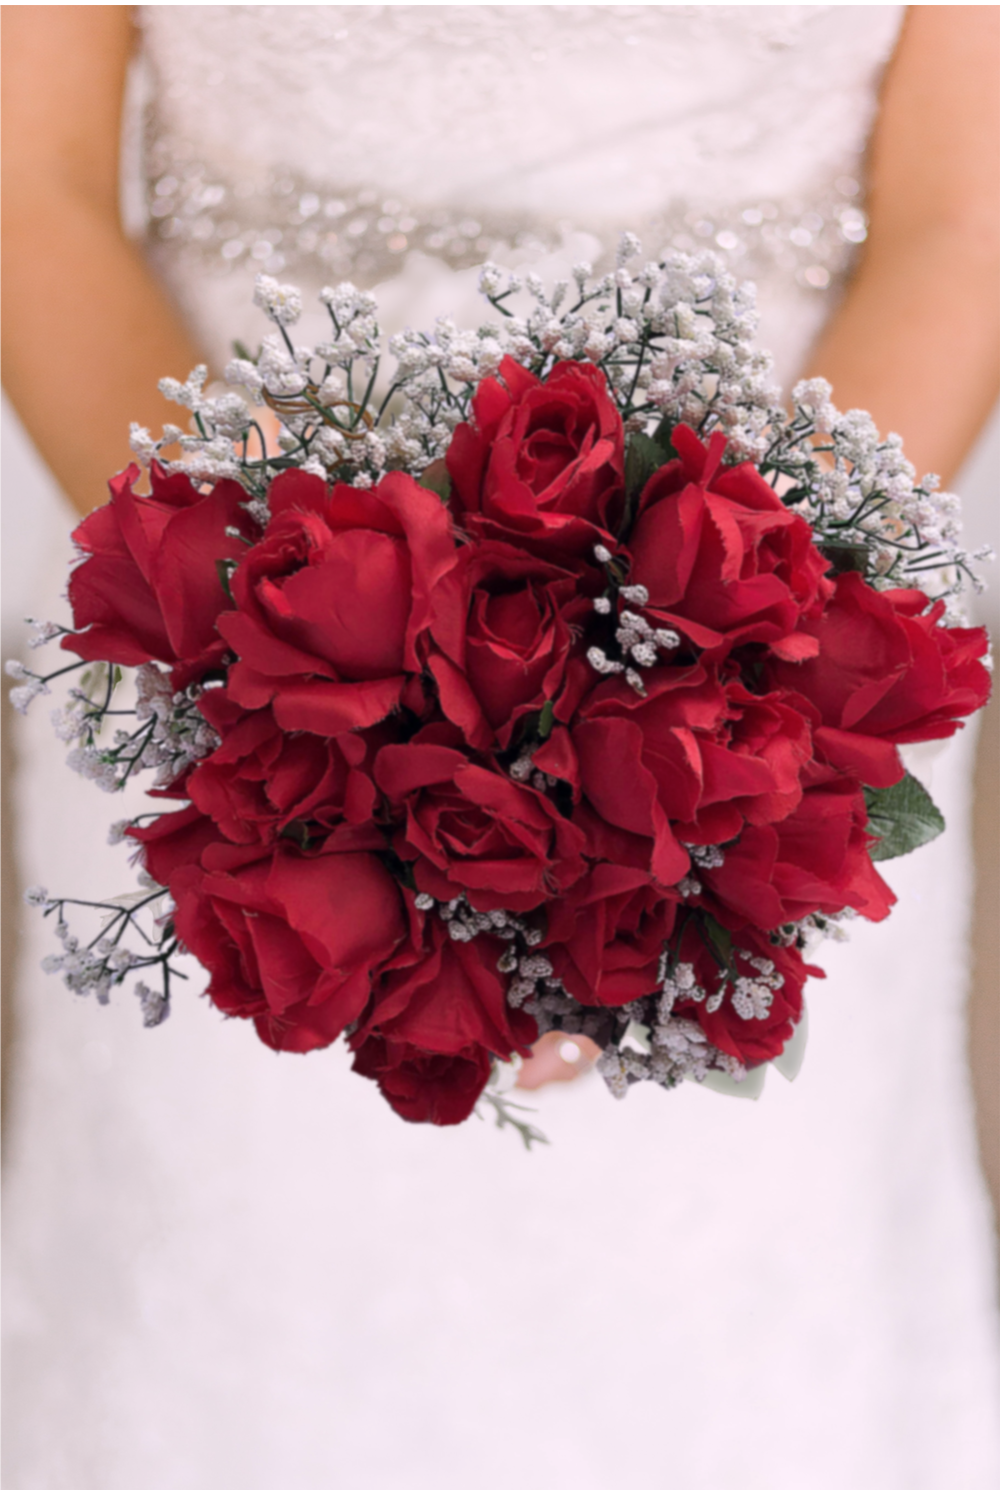 Bouquet of Flowers - Red roses with surrounding frosts